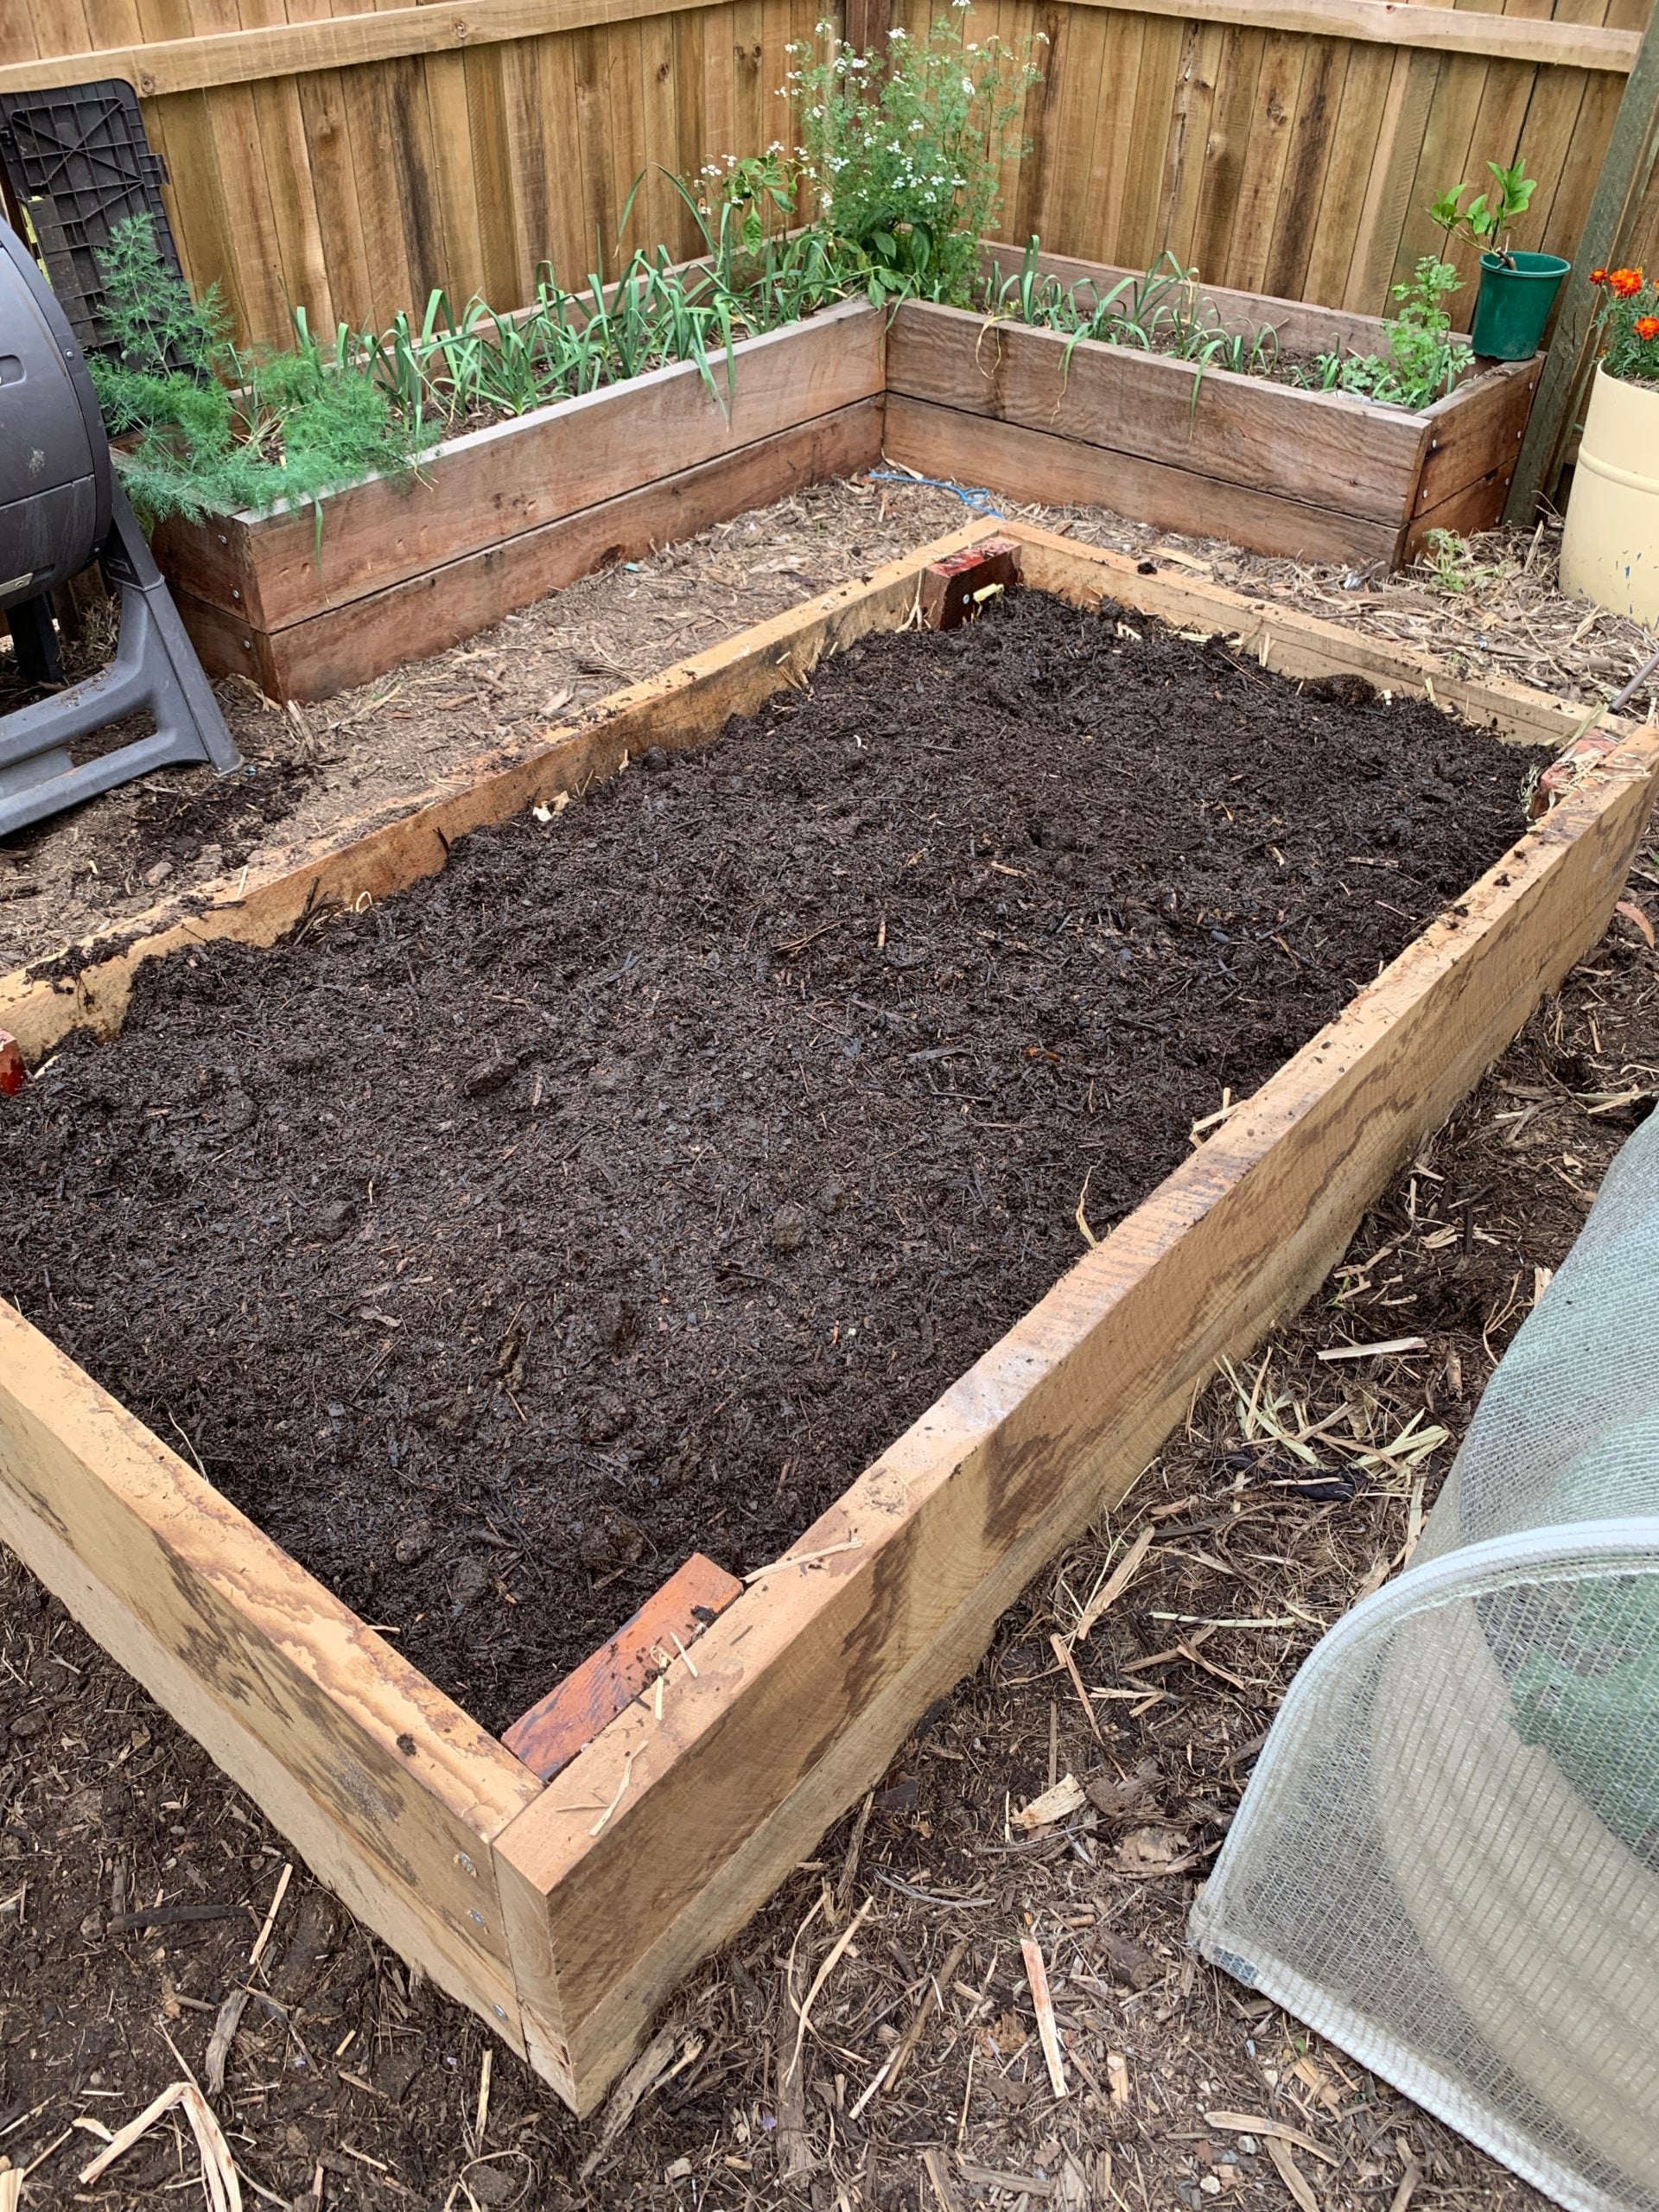 How To Fill A Raised Bed For Under 10 Love Of Dirt